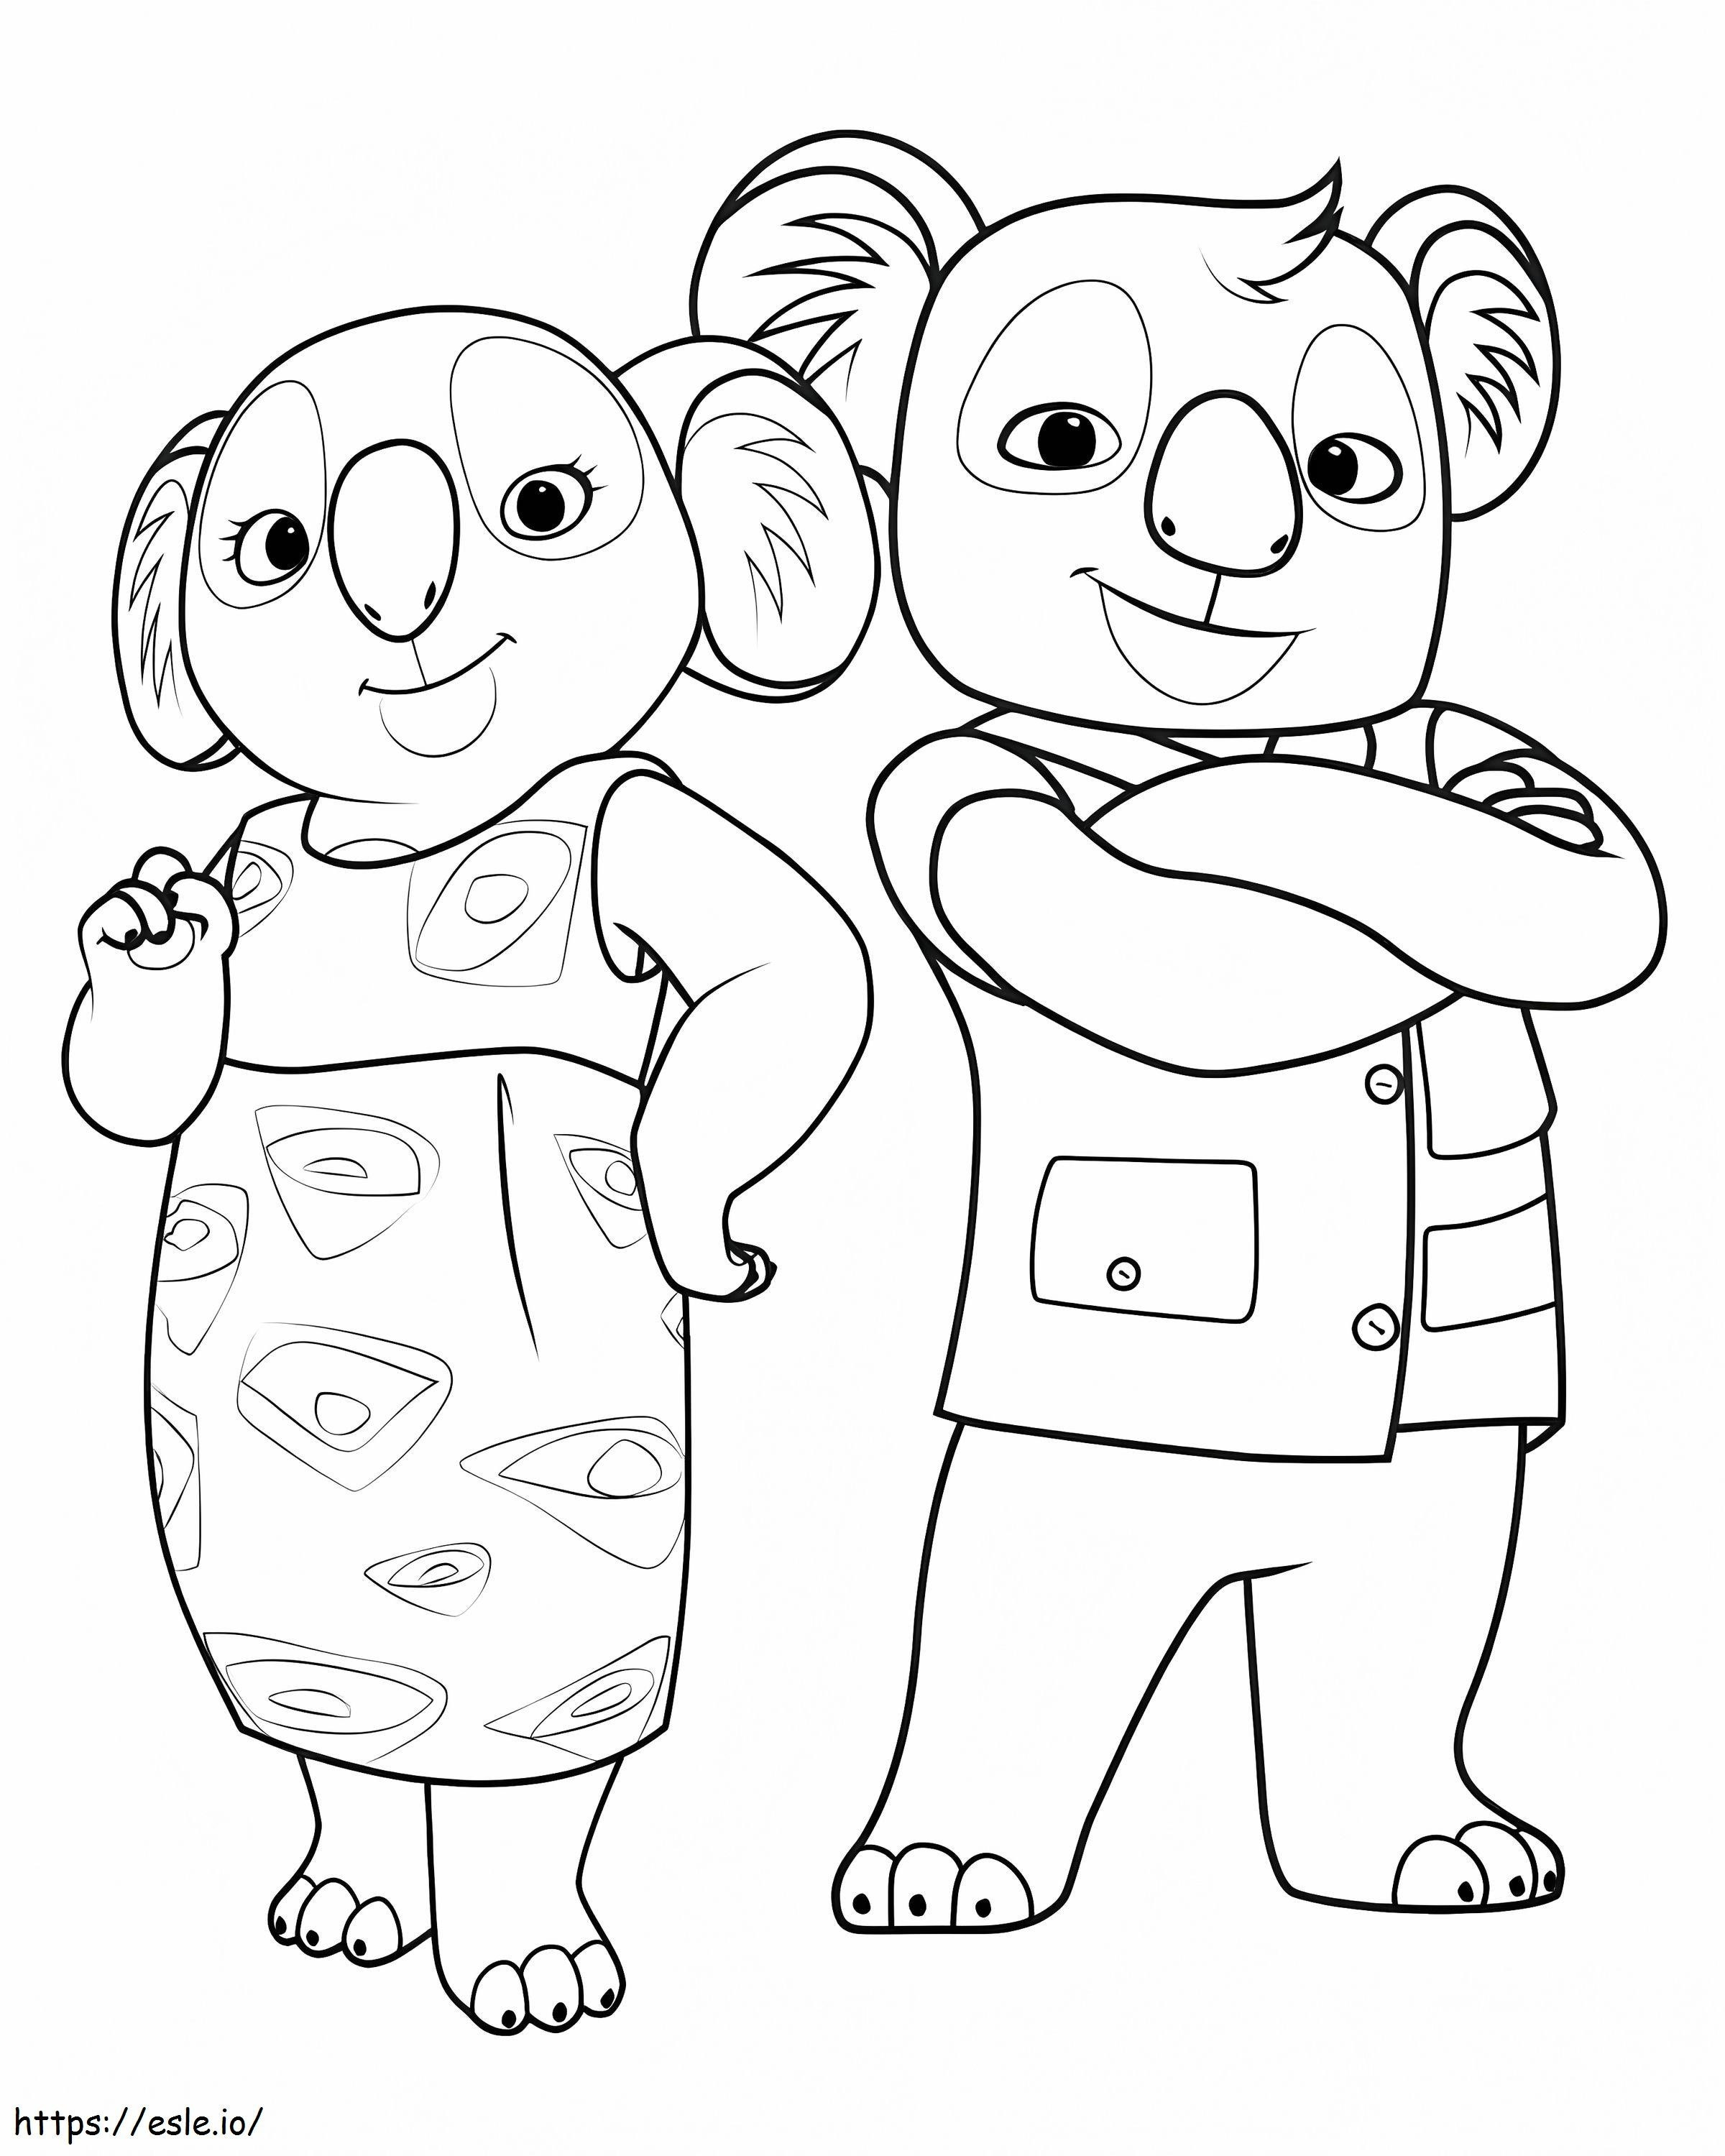 Blinky Bill Mom And Dad coloring page